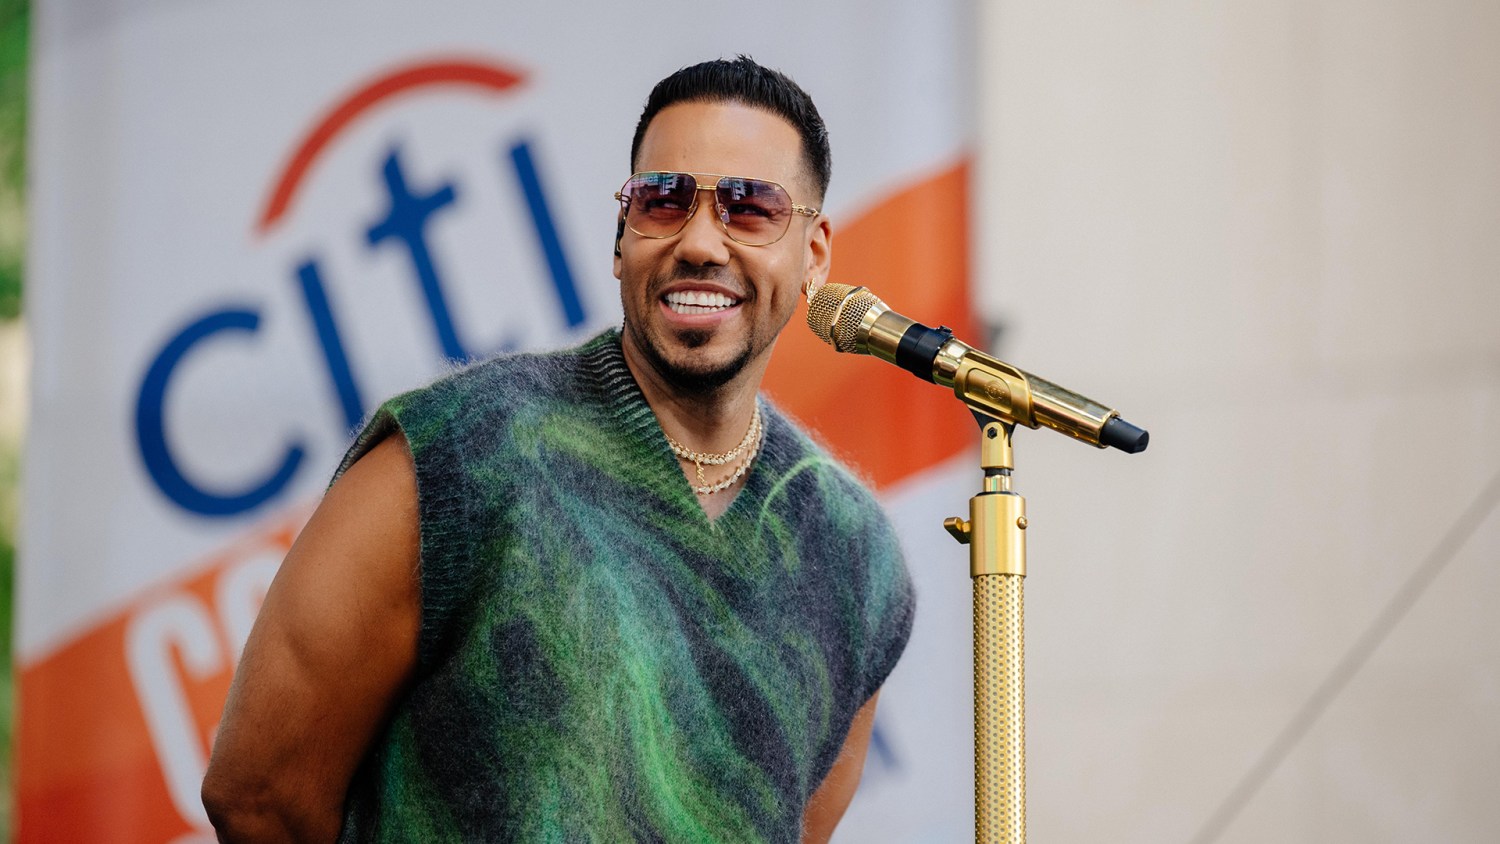 Romeo Santos shows why he is the King of Bachata kicking off new tour in  Perú: WATCH